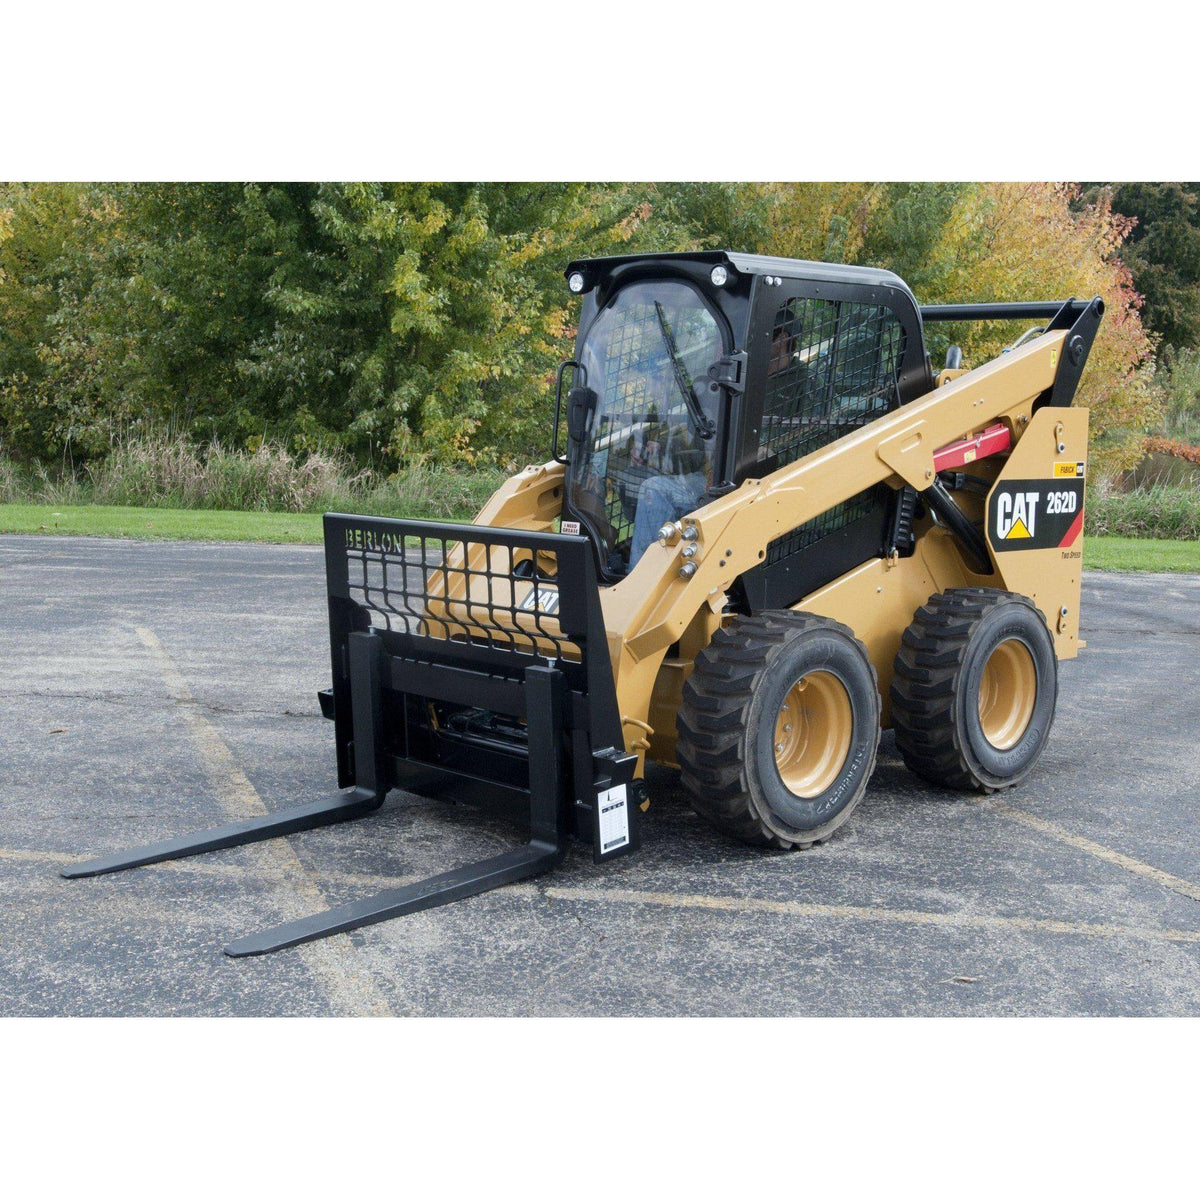 cat skid steer with class 3 pallet forks from berlon industries